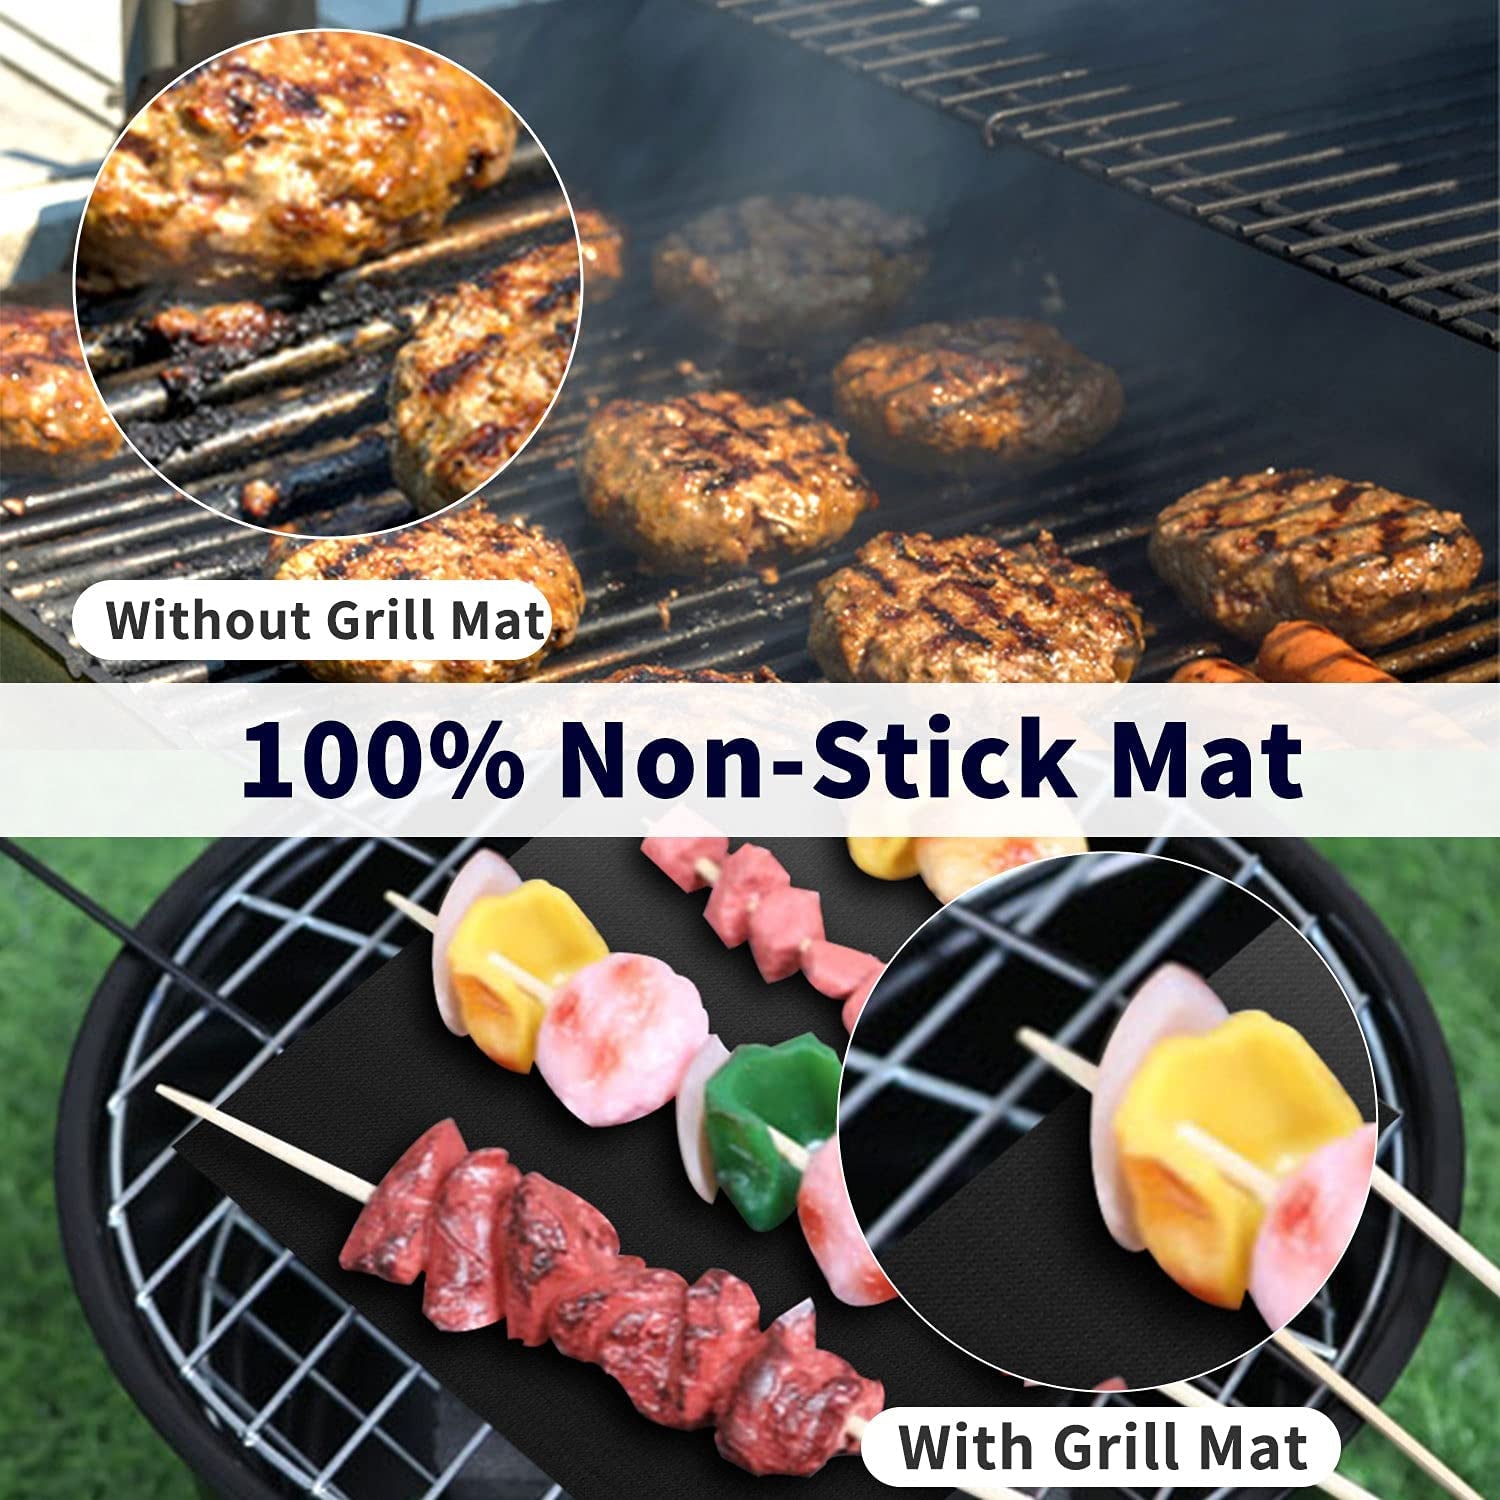 Grill Mats for Outdoor Grill -Set of 5 Nonstick BBQ Grill Mat 15.75 X 13", Reusable & Heavy Duty under Grill Mat, Easy to Clean, Works for Gas, Charcoal, Electric Grill